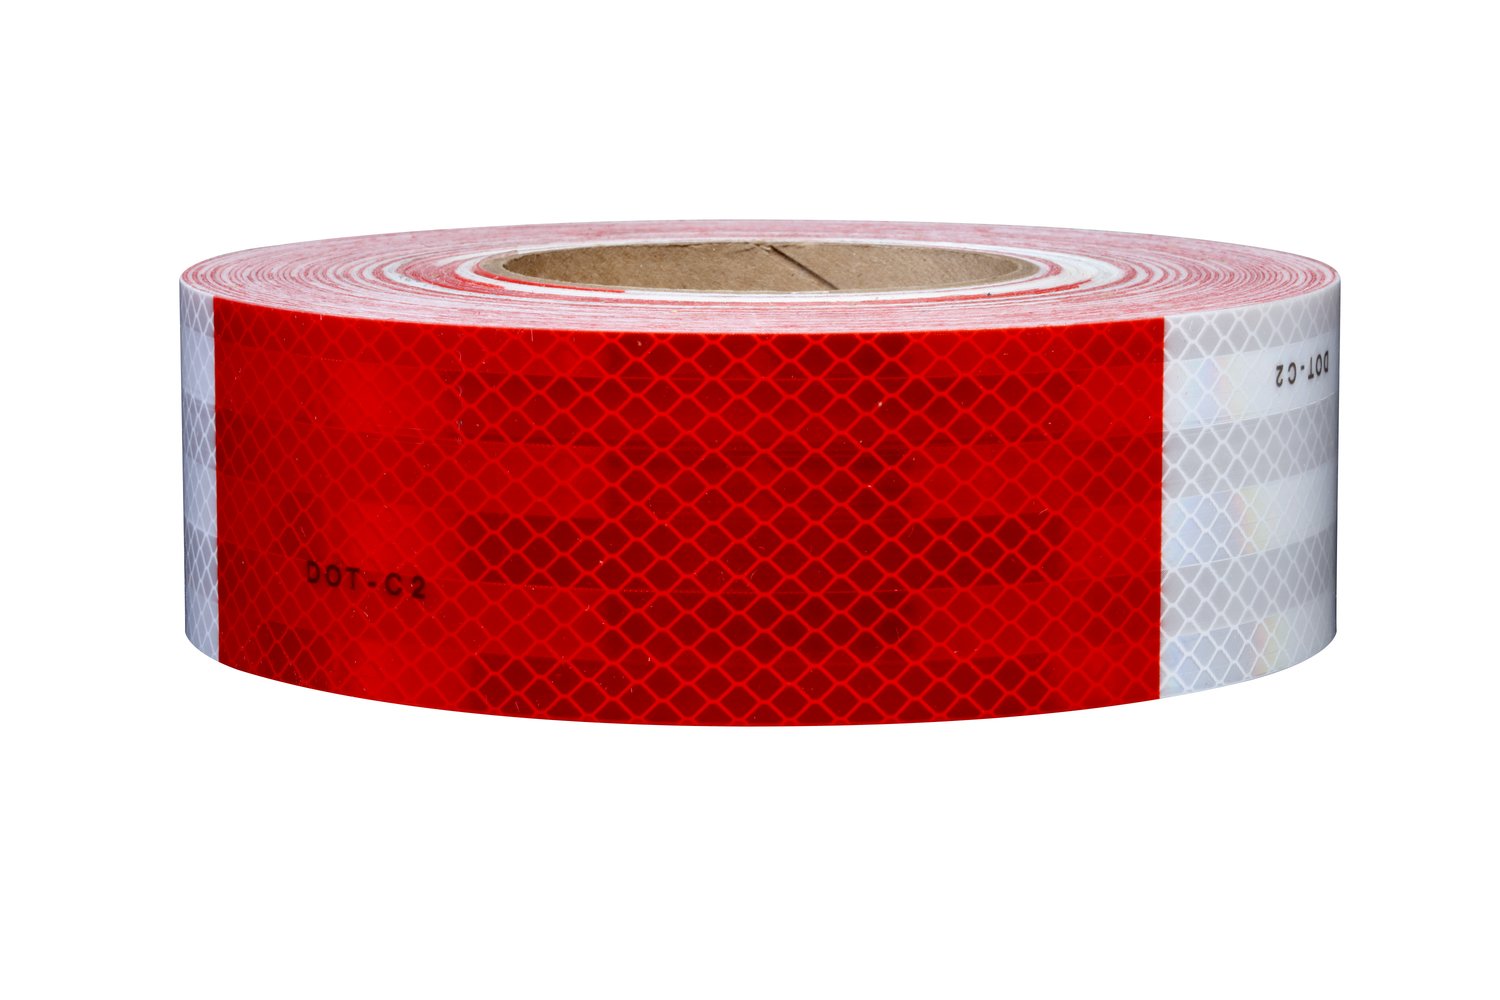 7010318258 - 3M Diamond Grade Conspicuity Markings 983-326, Red/White, 2 in x 50
yd, Kiss-cut every 96 in